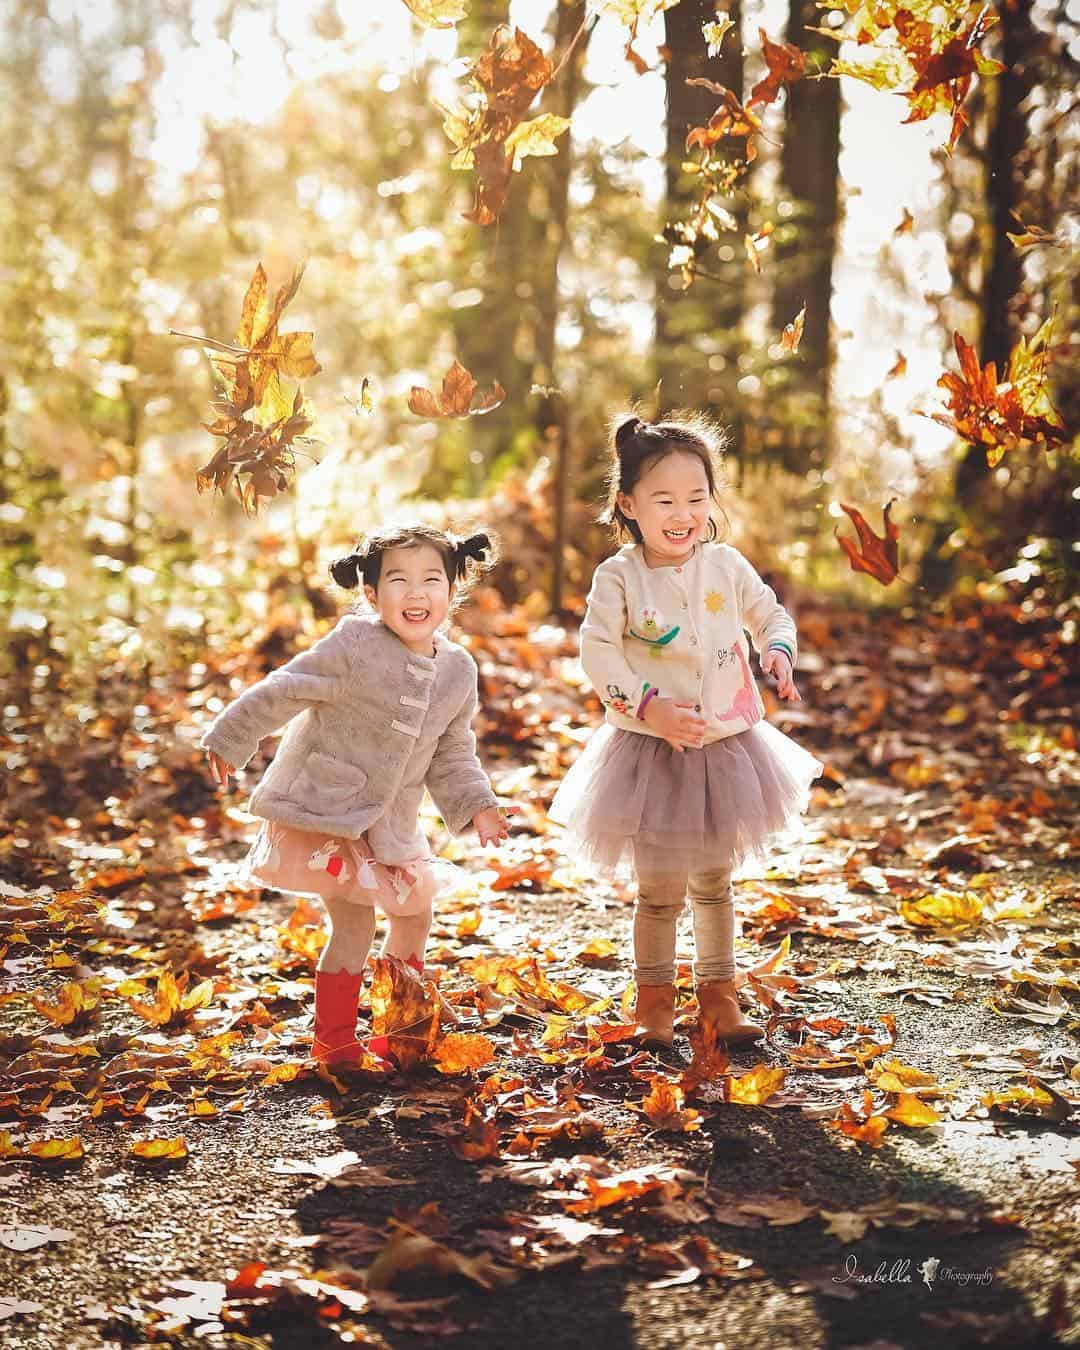 outdoor activities for kids in the fall - play in the leaves